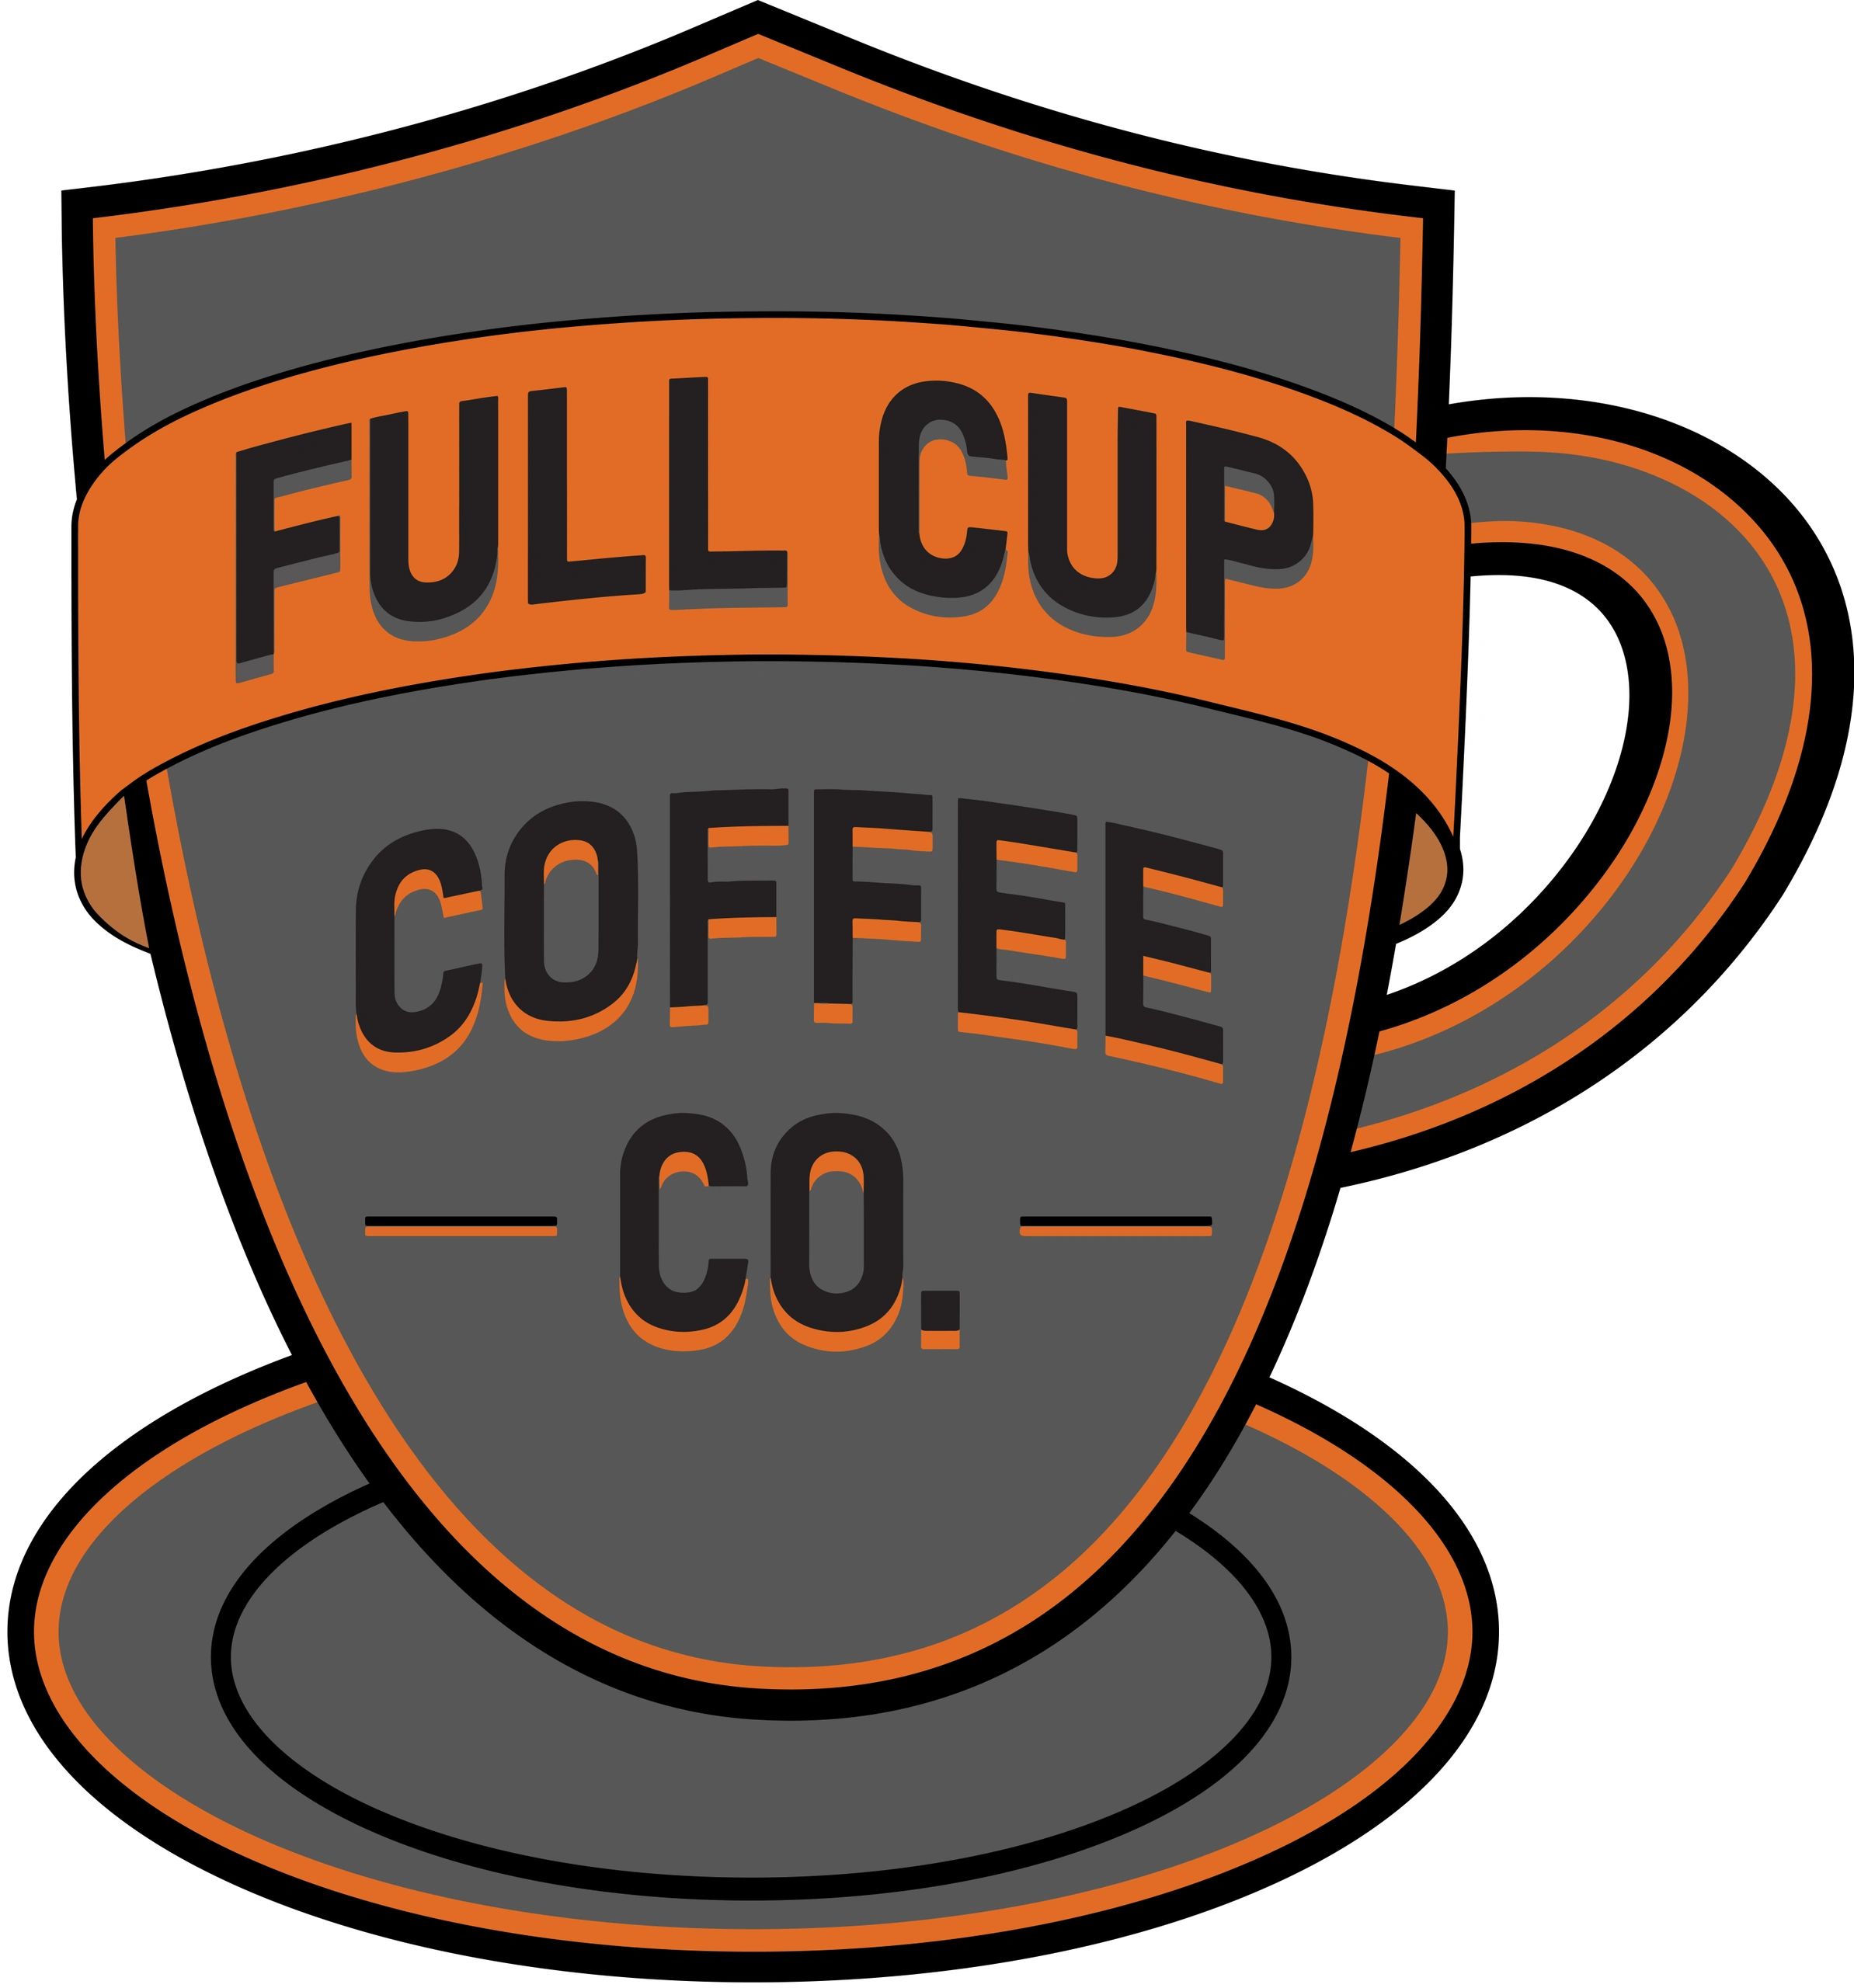 About | Full Cup Coffee Co.